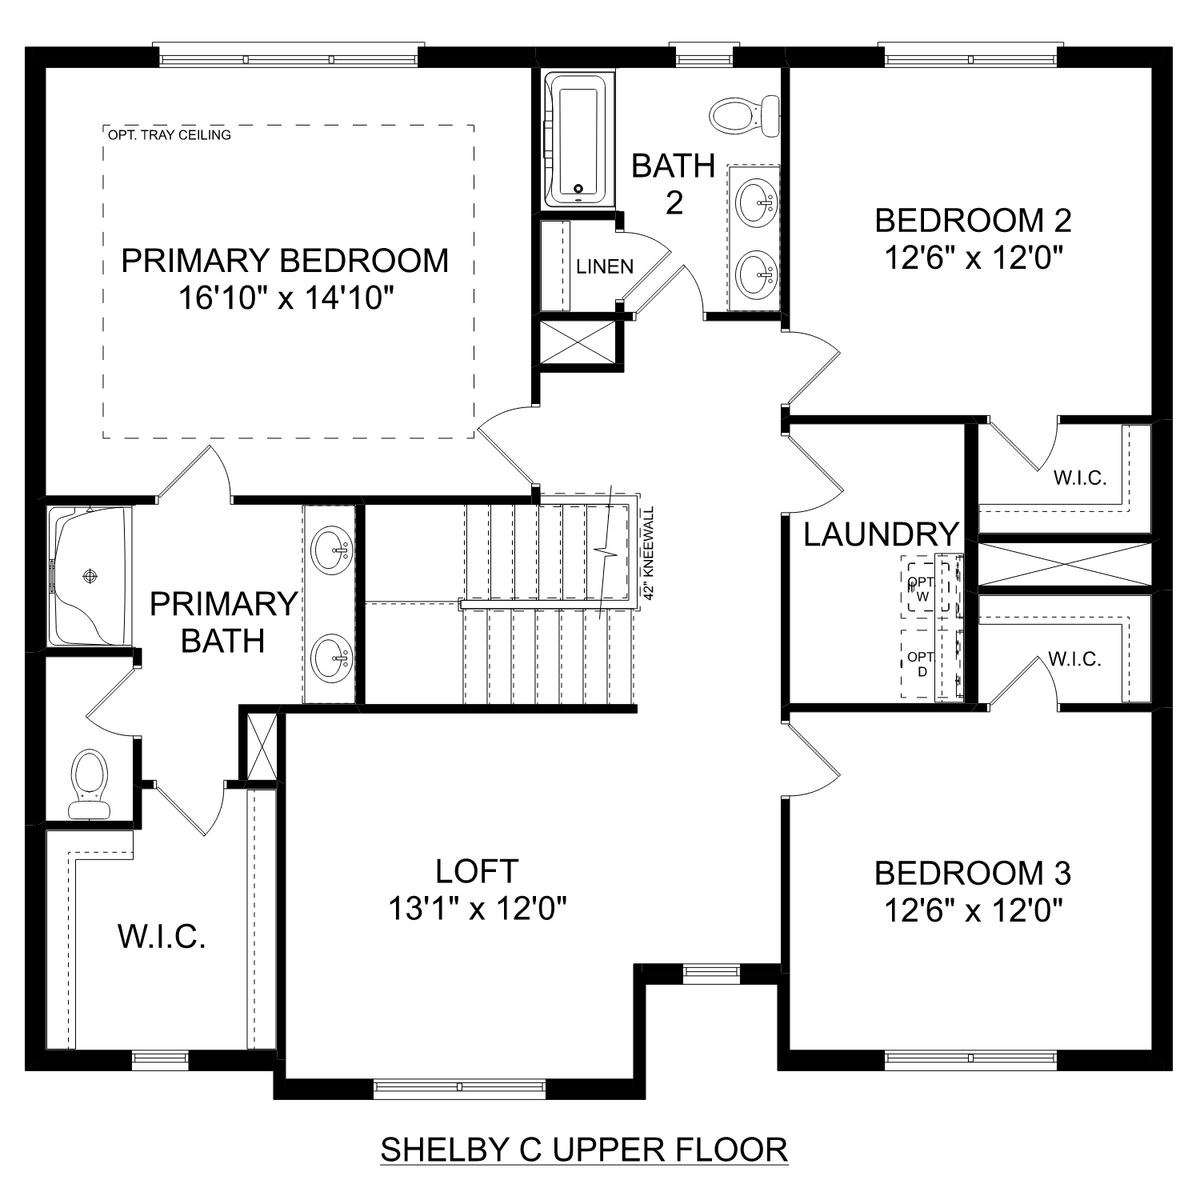 2 - The Shelby C floor plan layout for 125 Hazel Pine Trail in Davidson Homes' Clearview community.